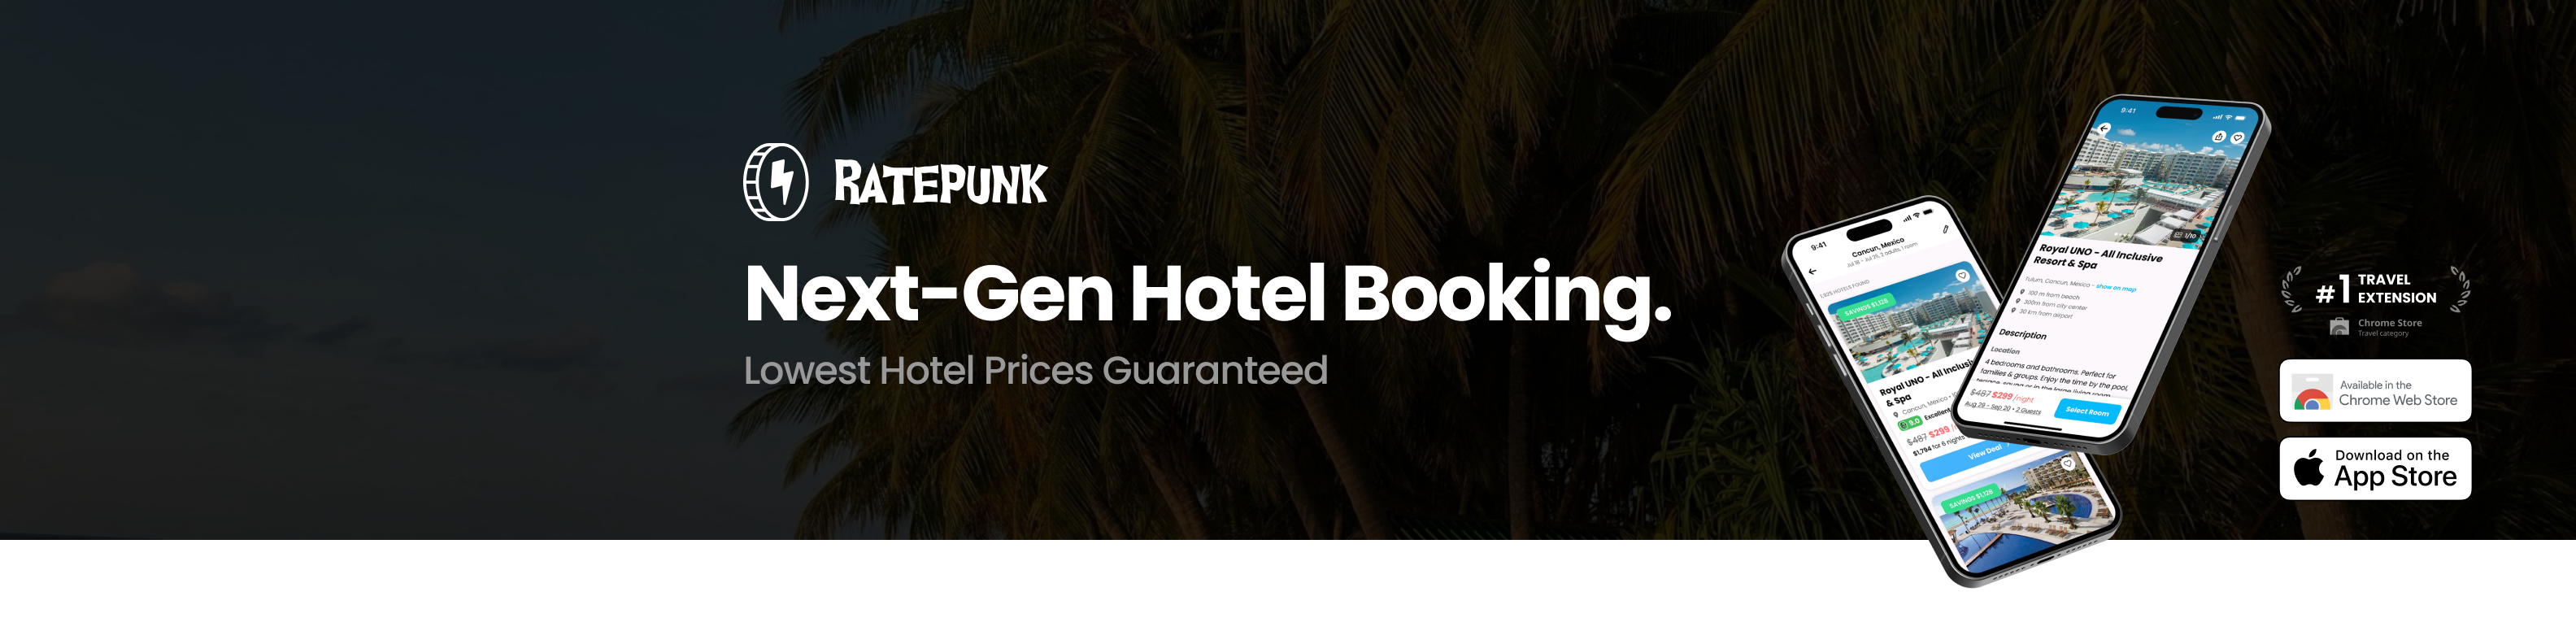 RatePunk next gen hotel booking lowest hotel prices guaranteed - book hotels easily and save much